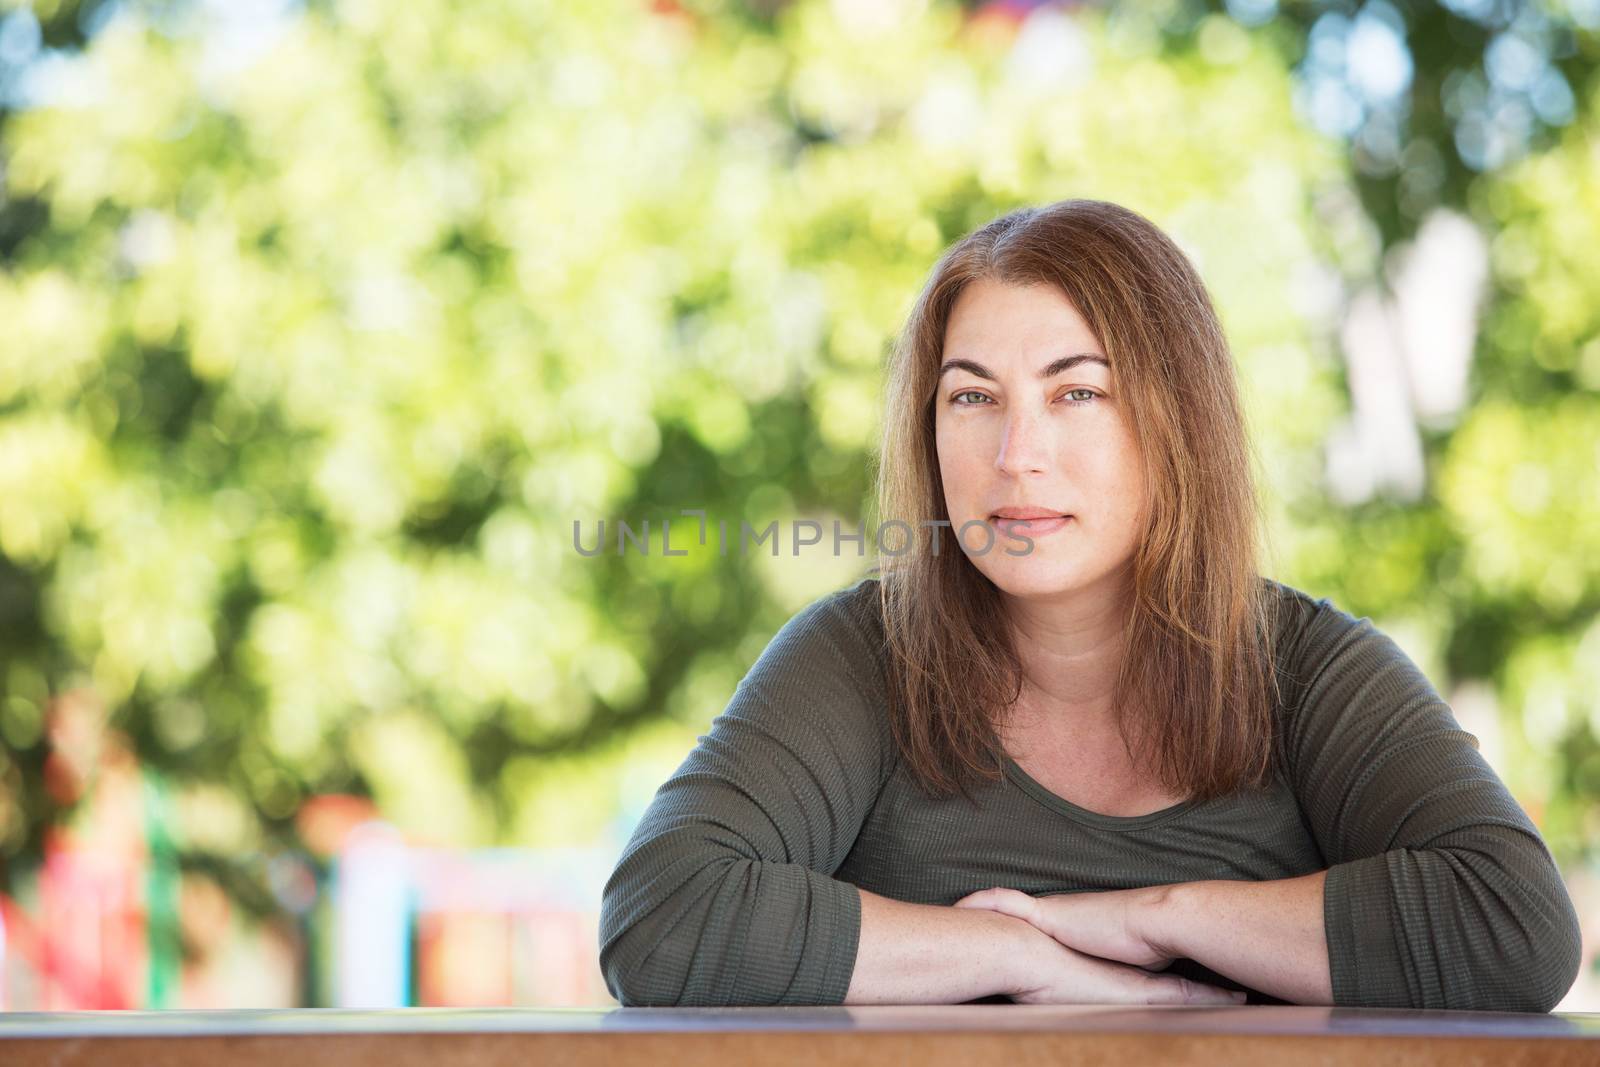 Pretty single adult female with folded arms seated at table with tree in background